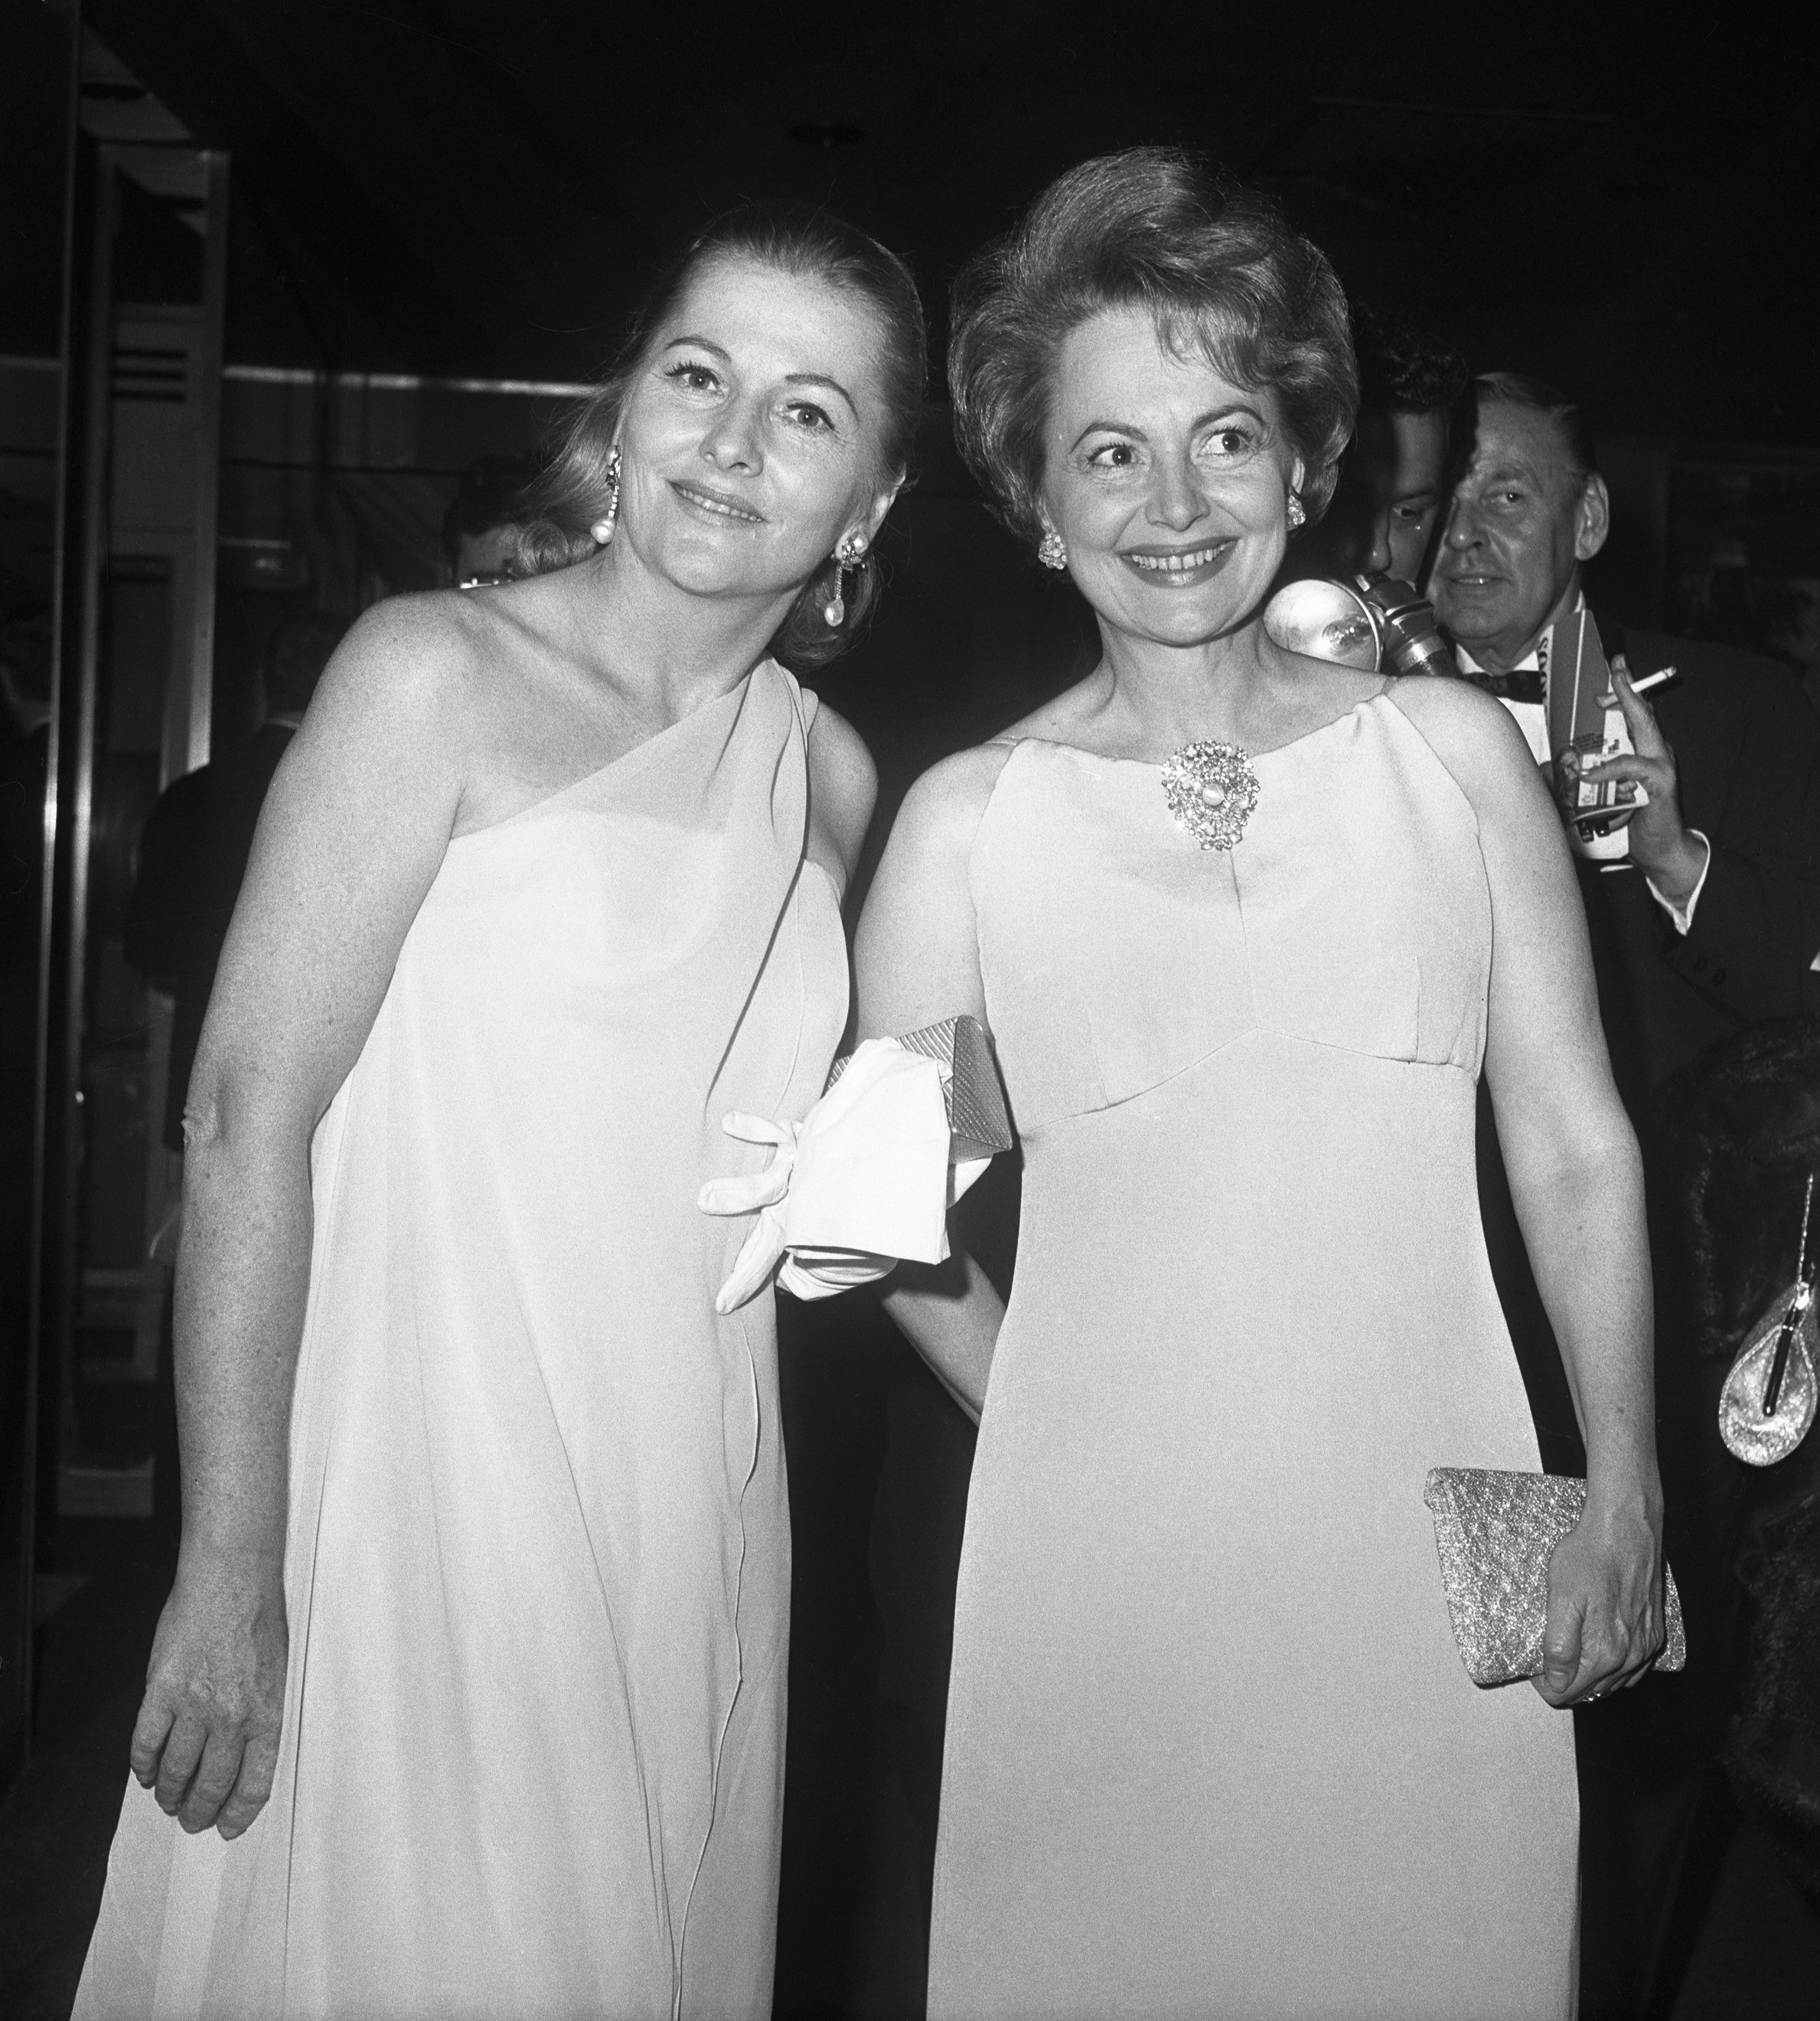 Olivia de Havilland and sister Joan Fontaine during Marlene Dietrich's Opening Party - September 9, 1967 at Rainbow Room in New York City. | Source: Getty Images